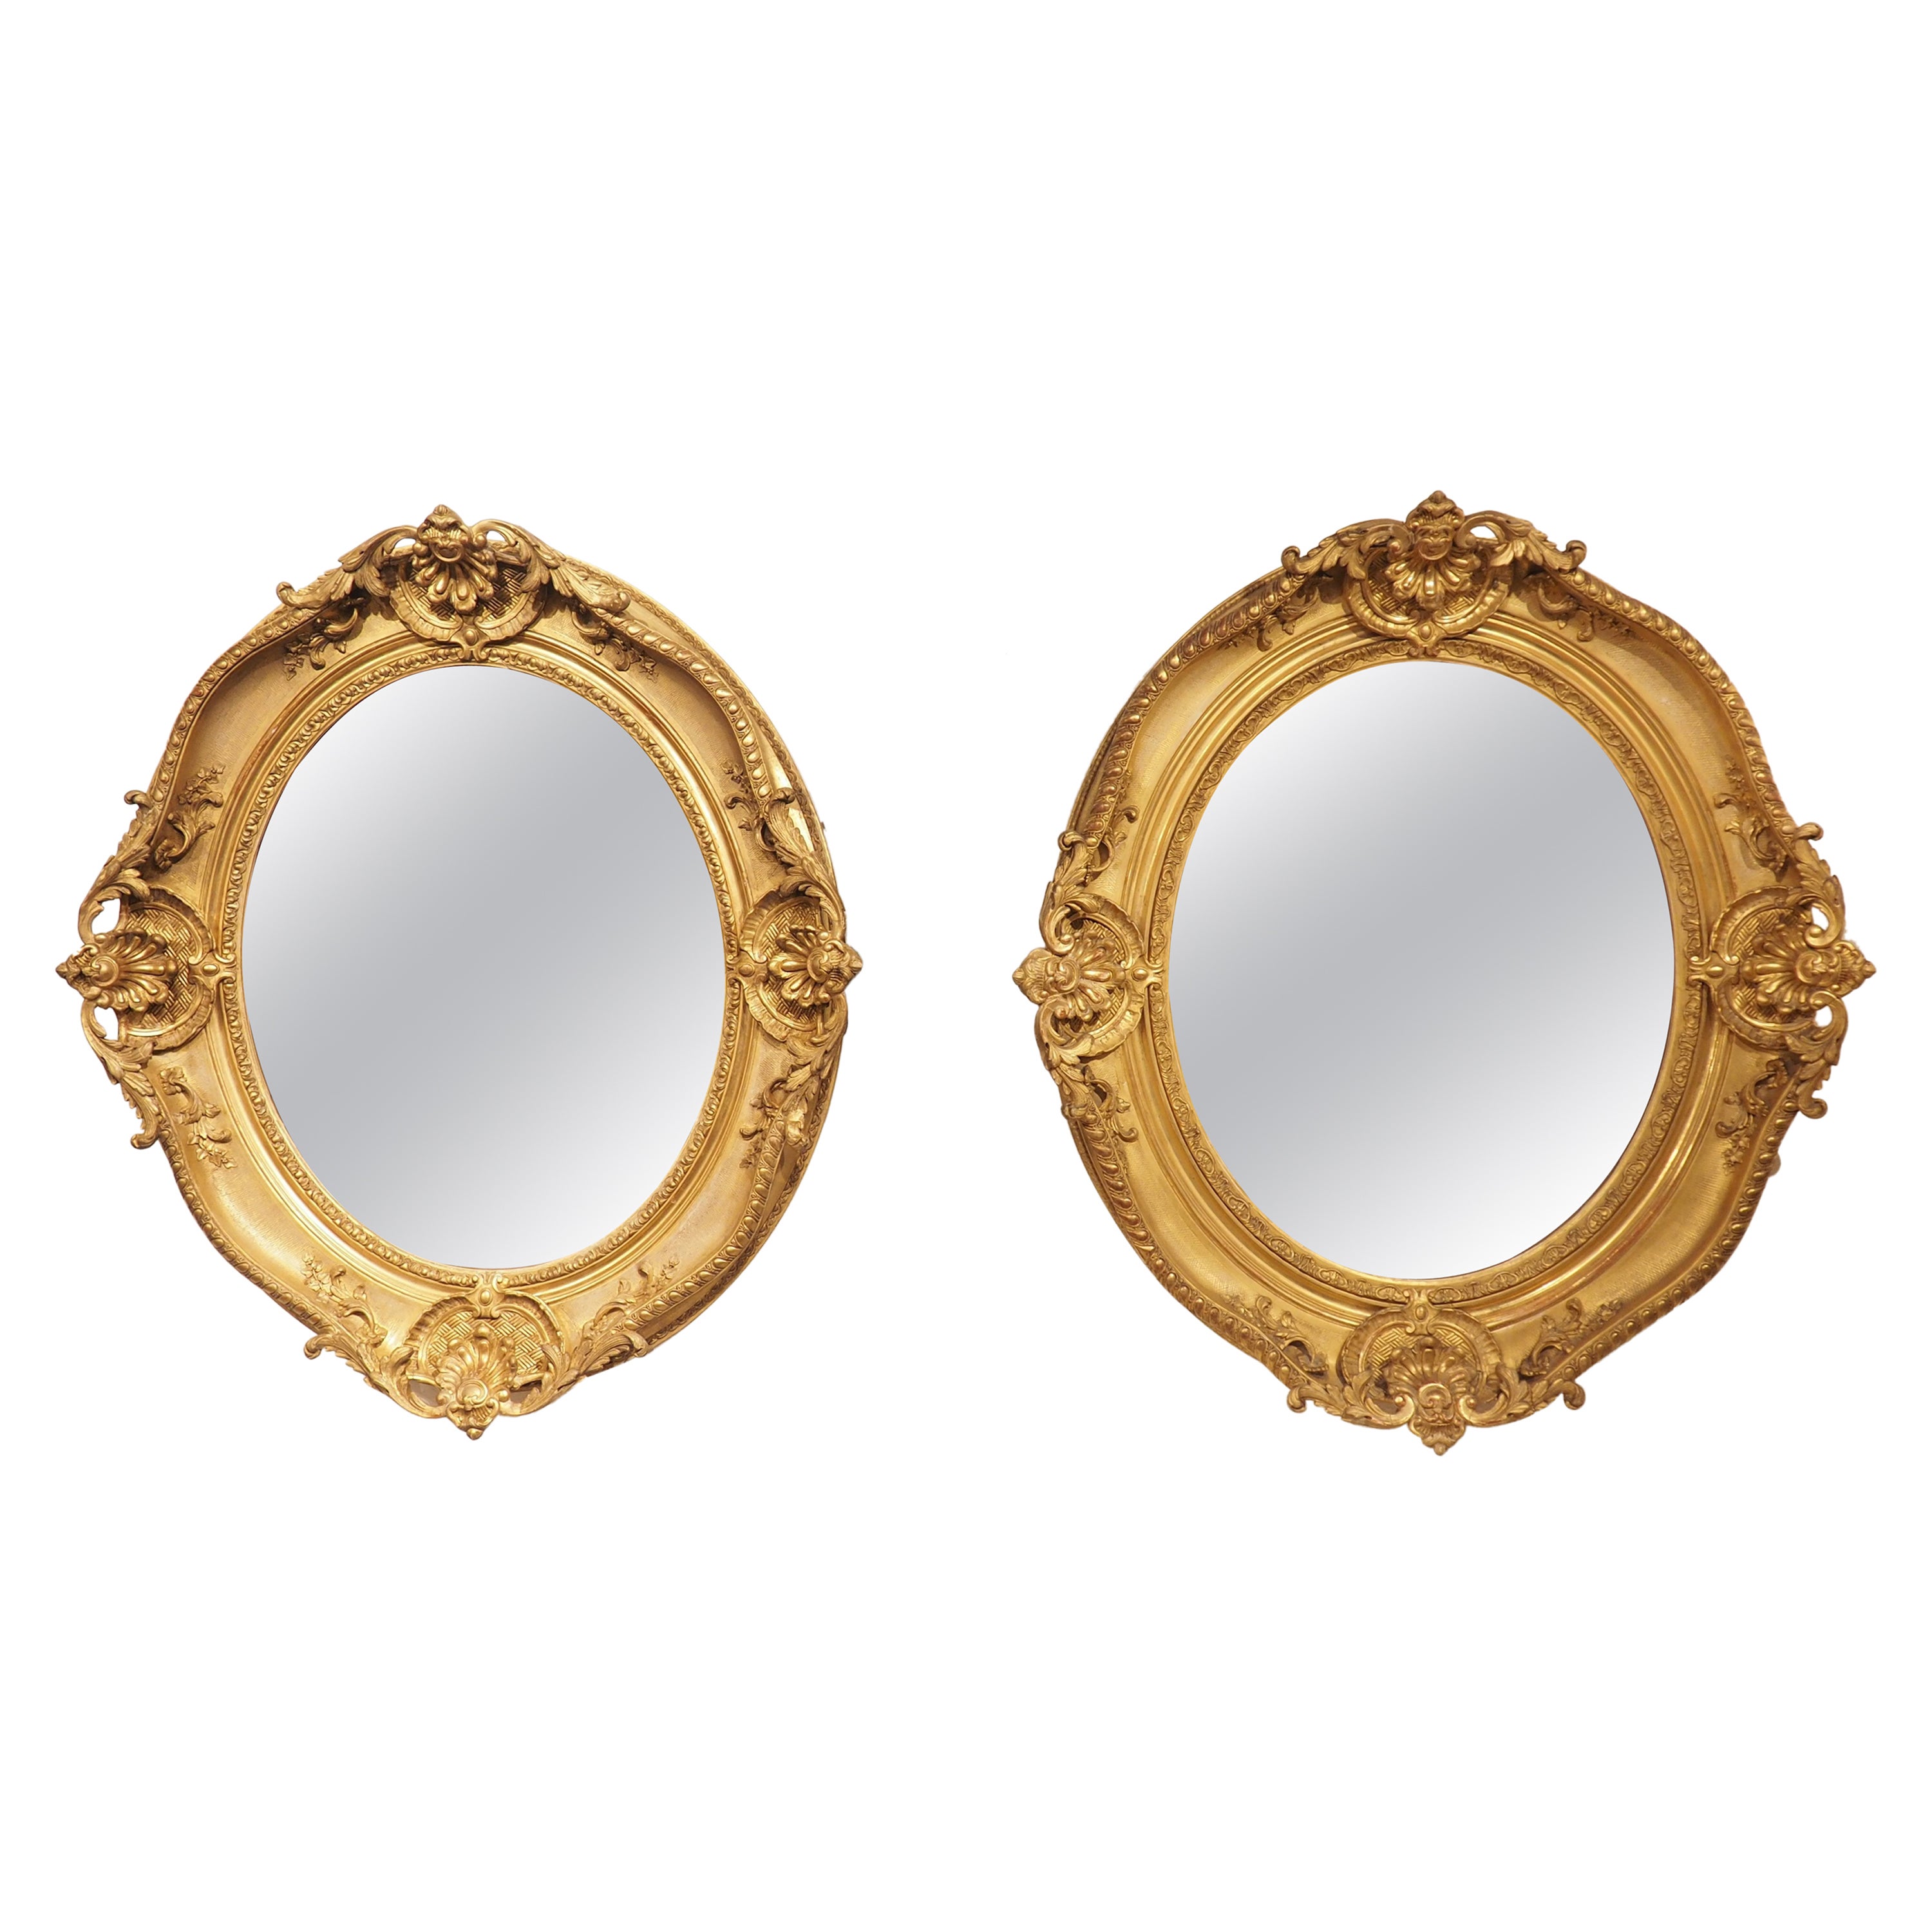 Pair of Large 19th Century Louis XV Style Oval Giltwood Mirrors from France